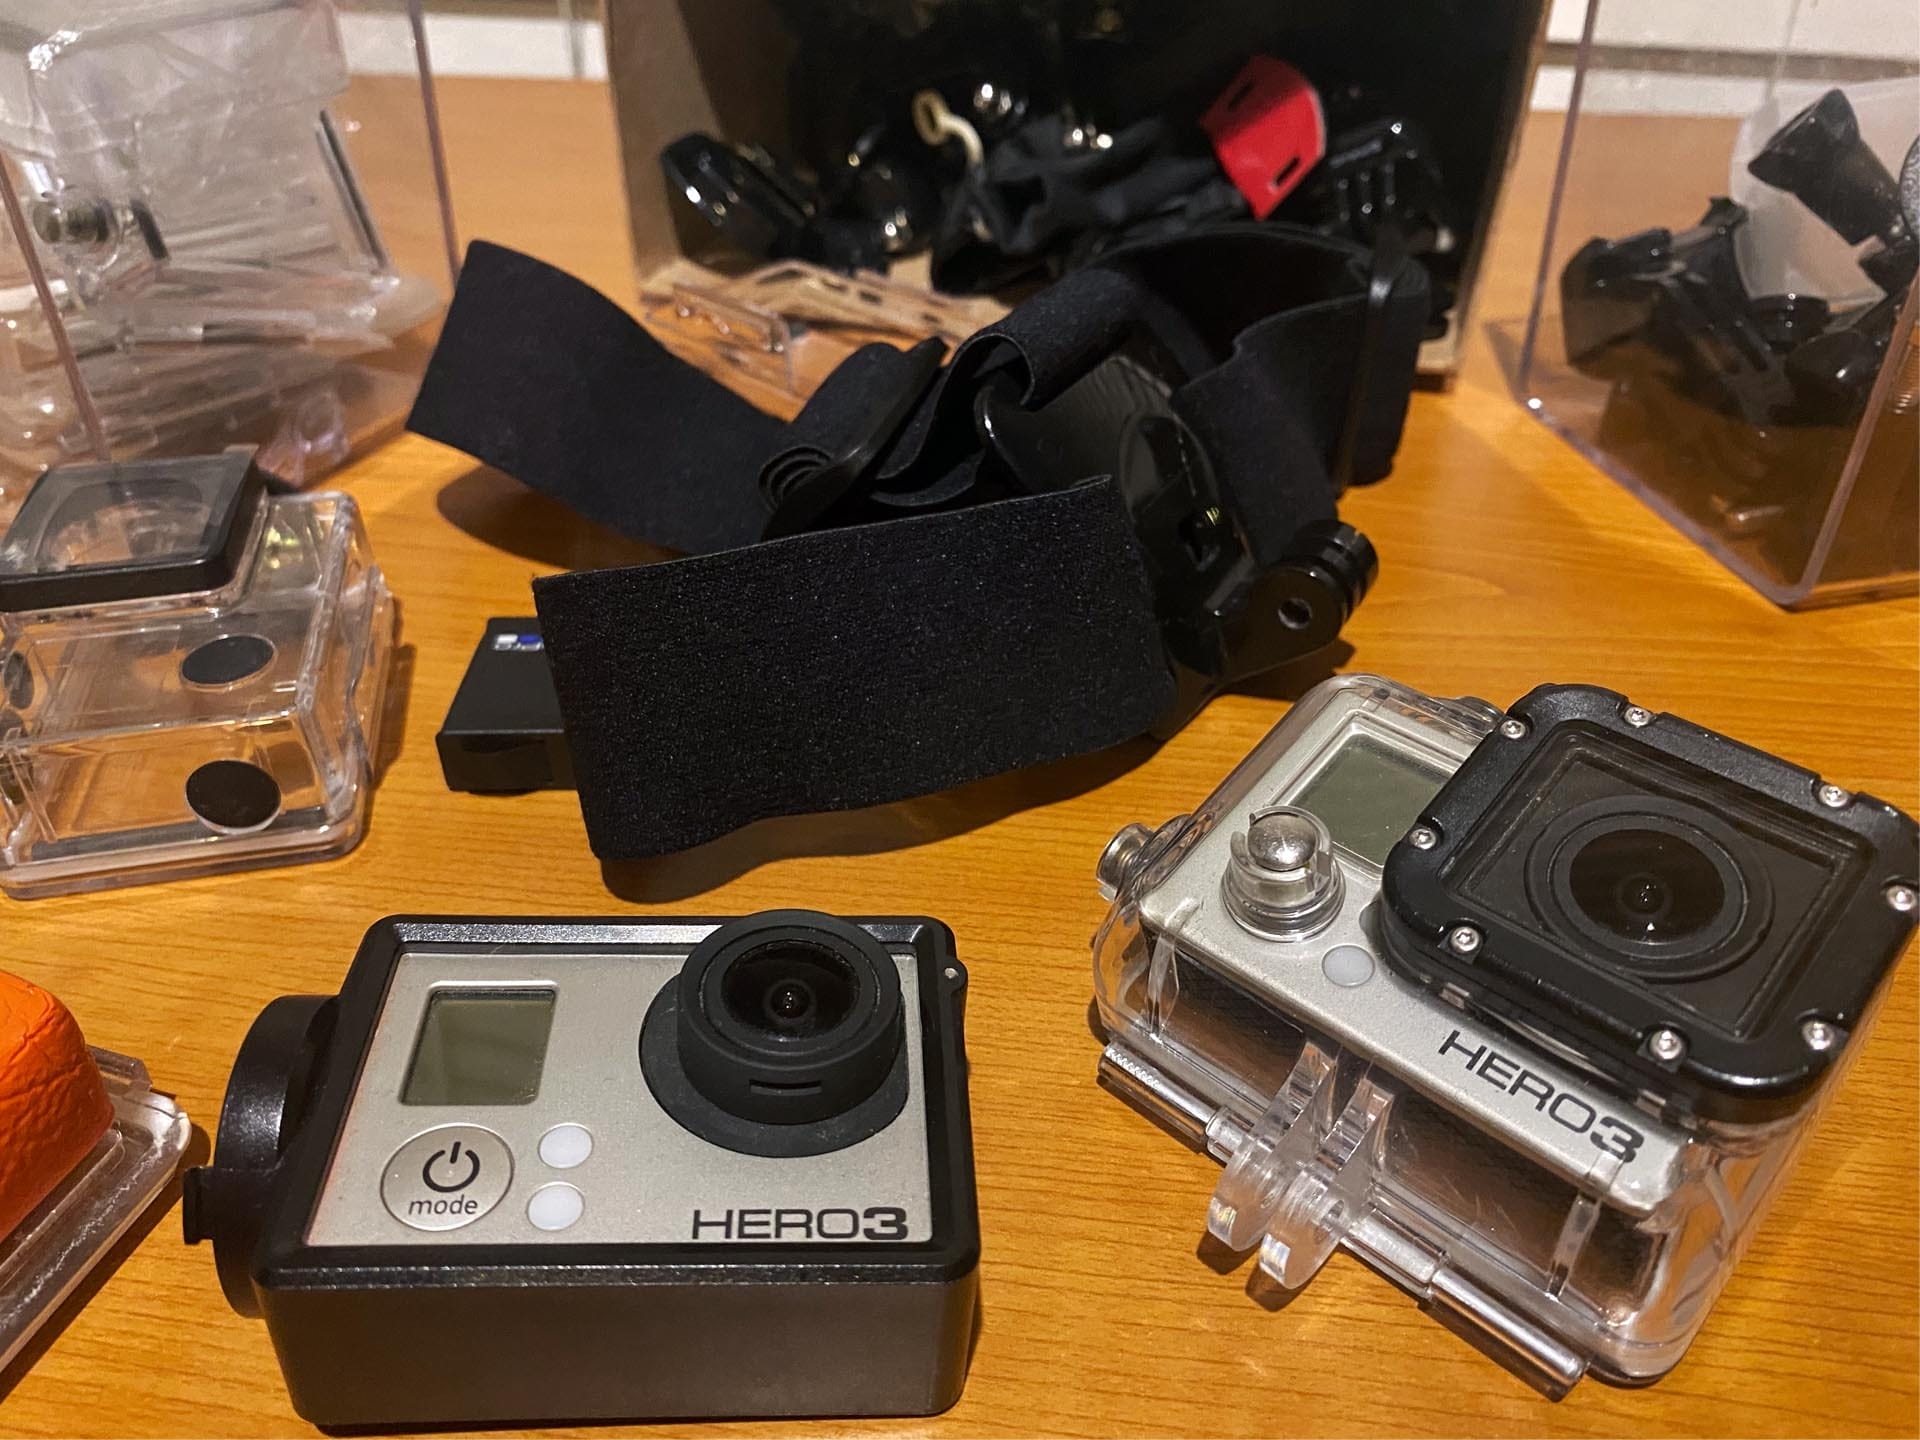 GoPro Hero 9 Black – Reviewed & Tested - The Most GoPro Bang For